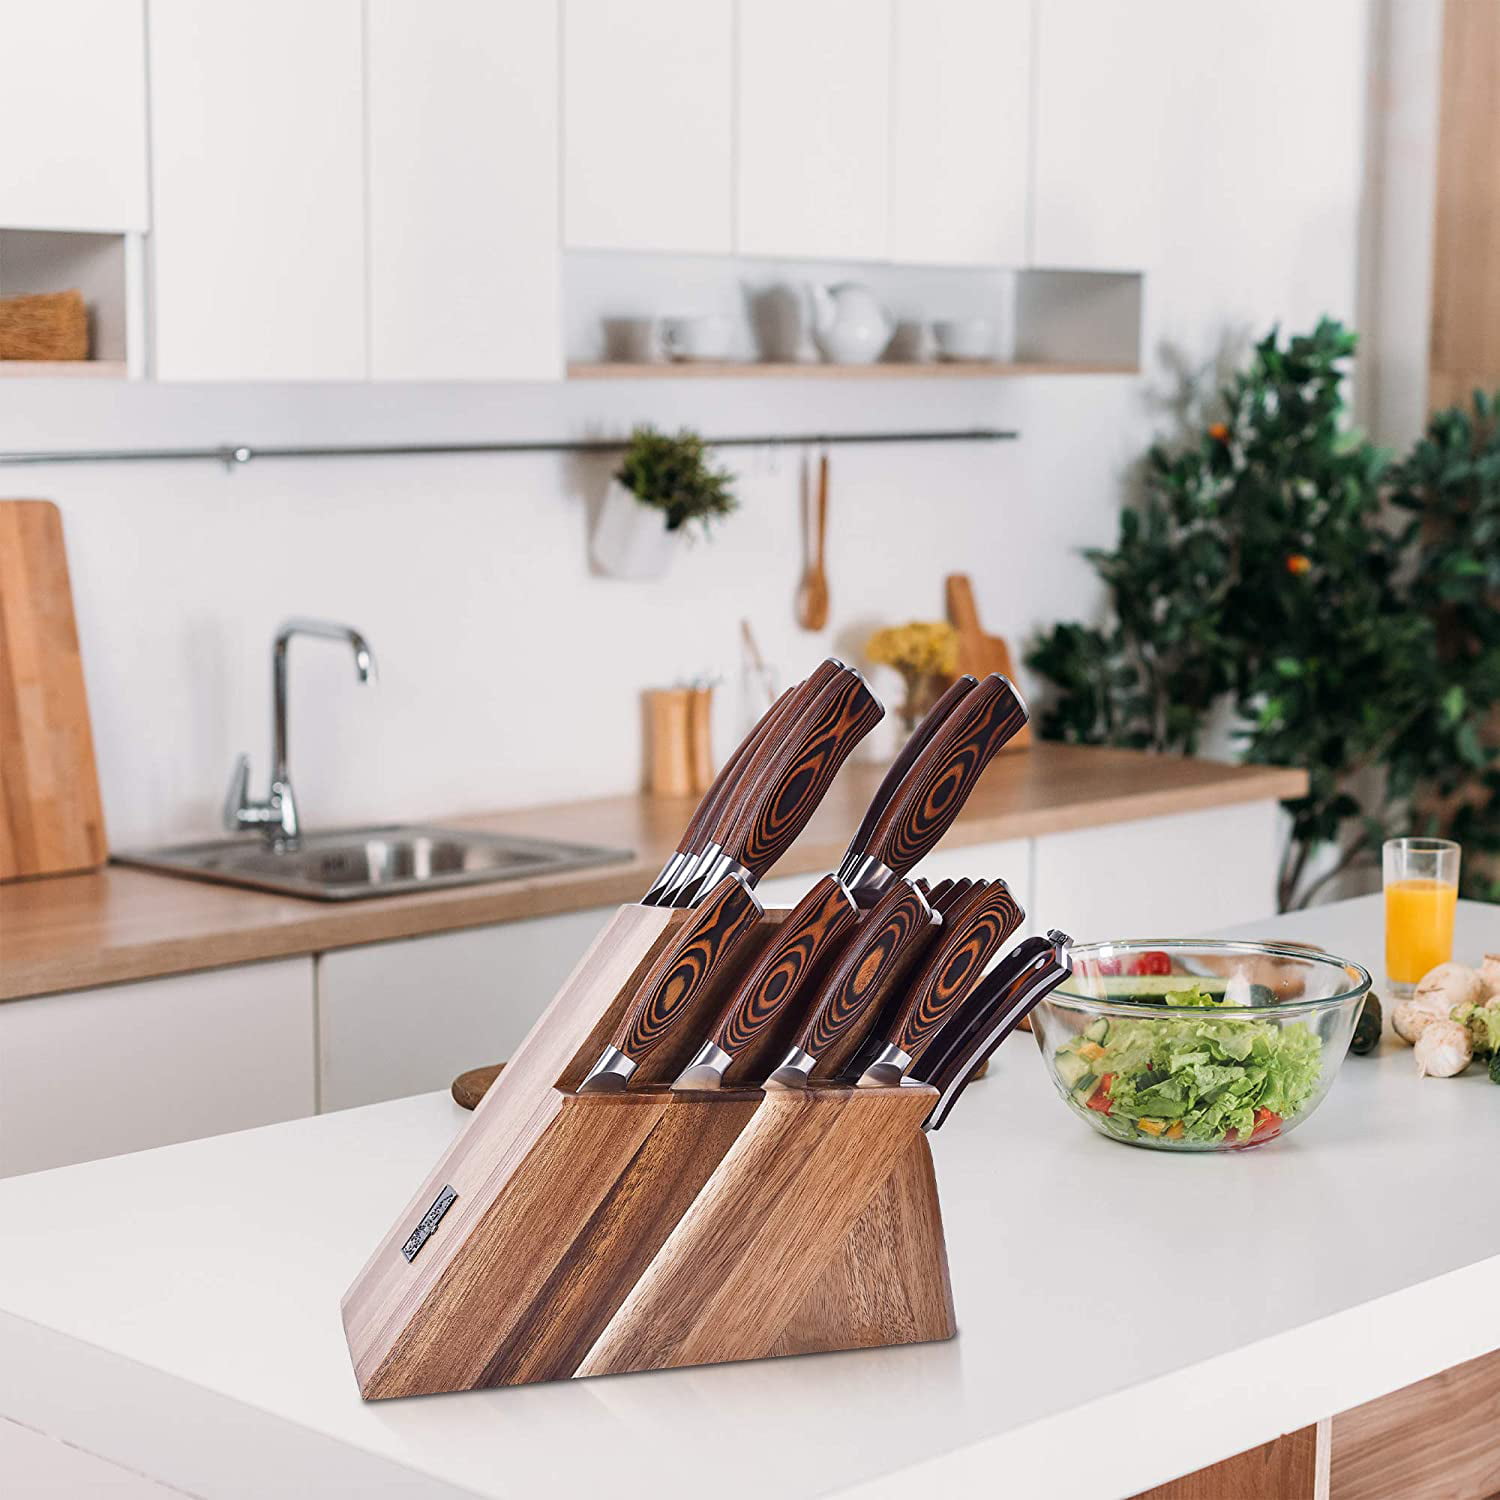 TUO Kitchen Knife Set - 8 Pcs Knife Set with Wooden Block, Honing Steel  Shears Included - German HC Stainless Steel Knife Block Set - Ergonomic